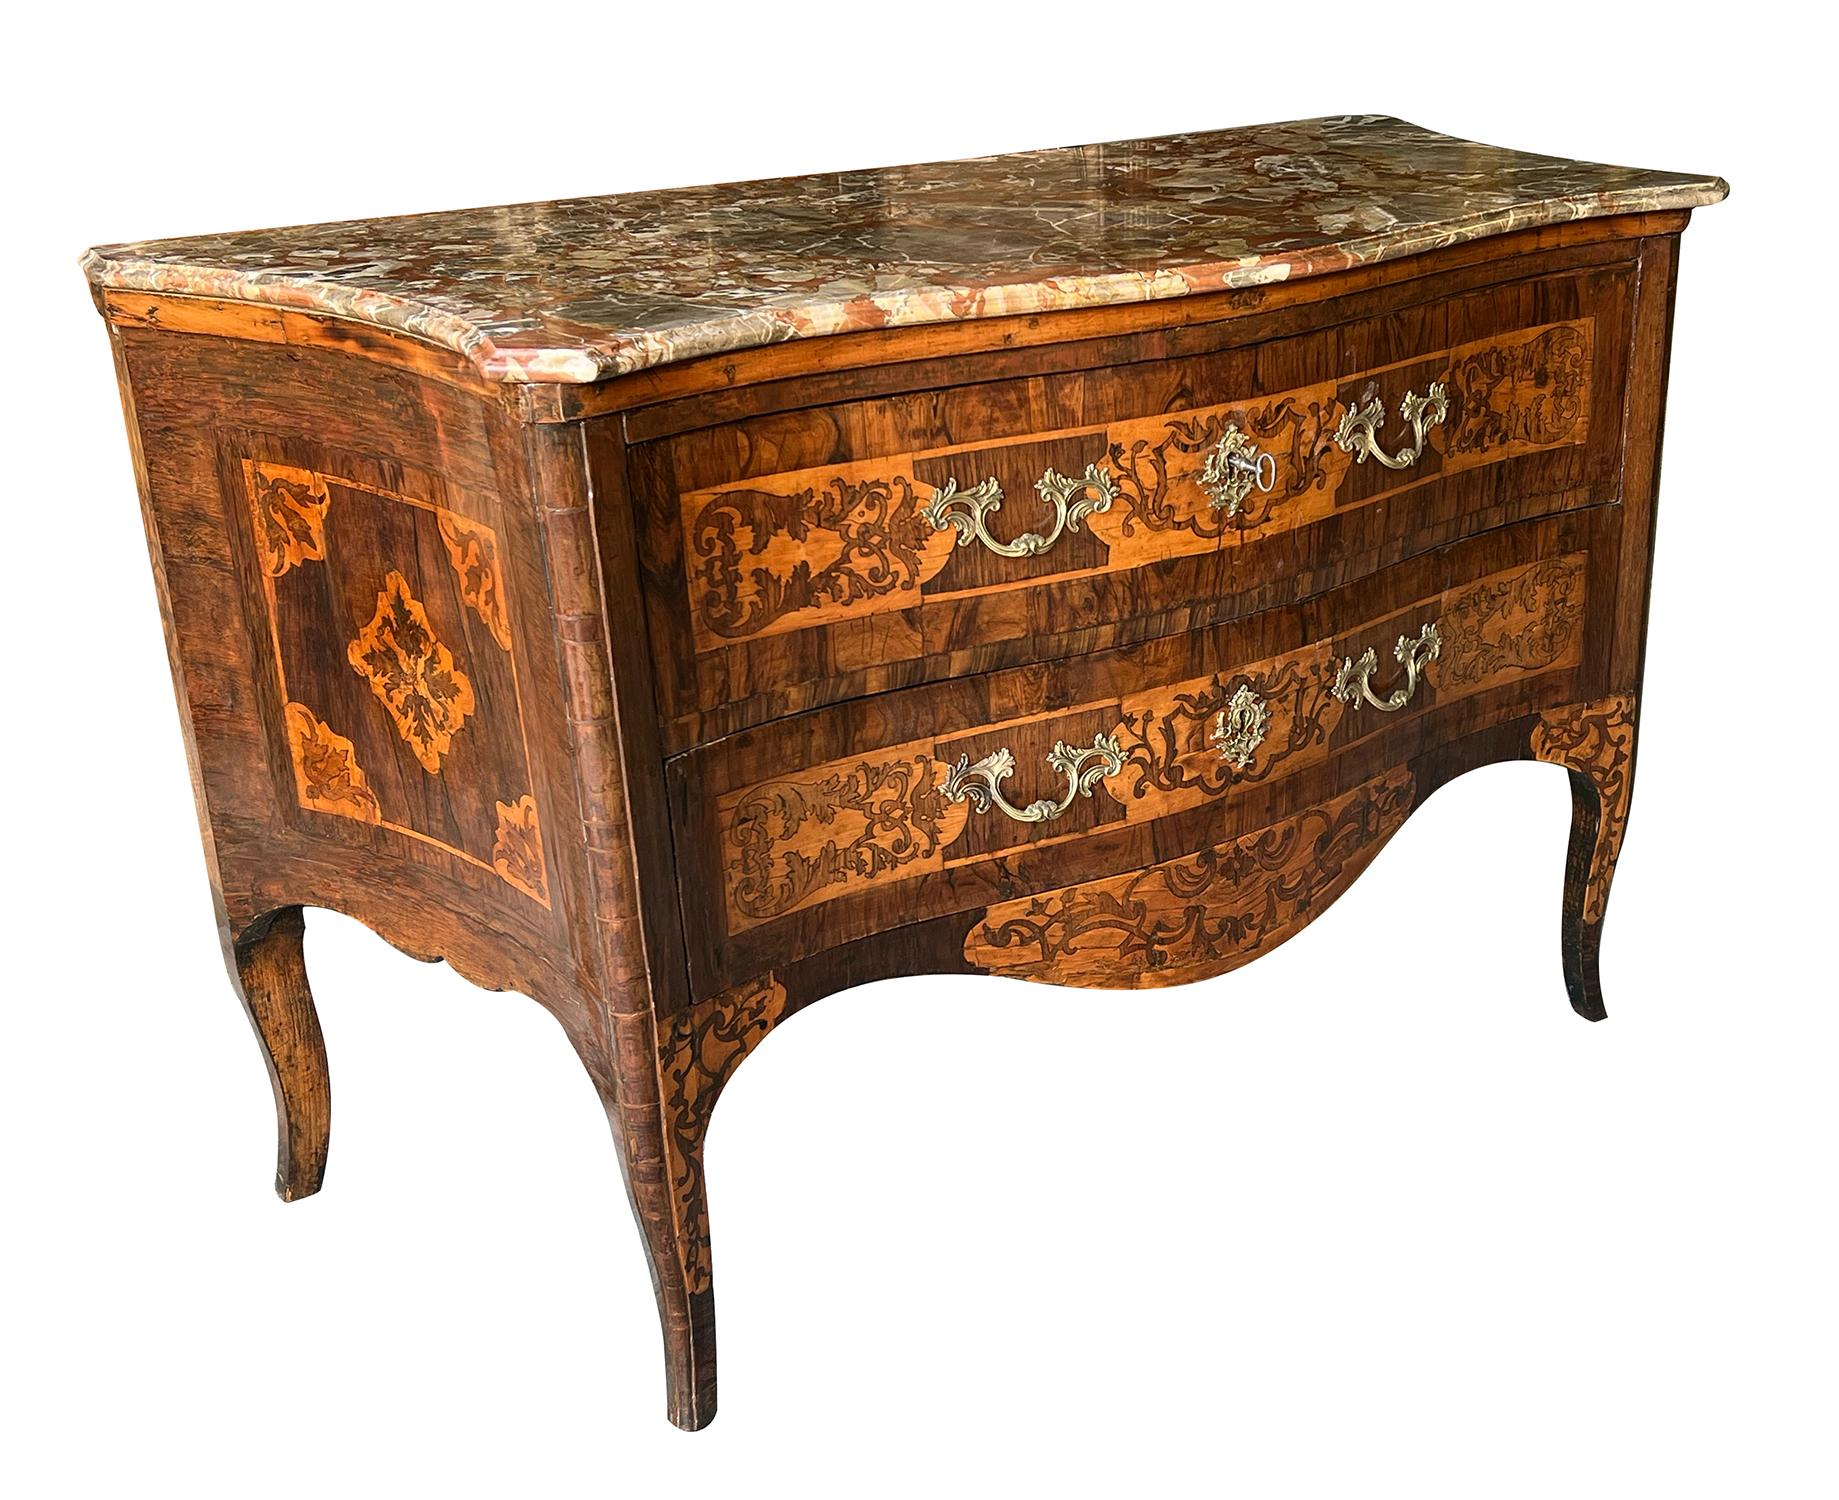 Italian Rococo Serpentine Form 2-Drawer Inlaid Chest with Marble Top For Sale 3